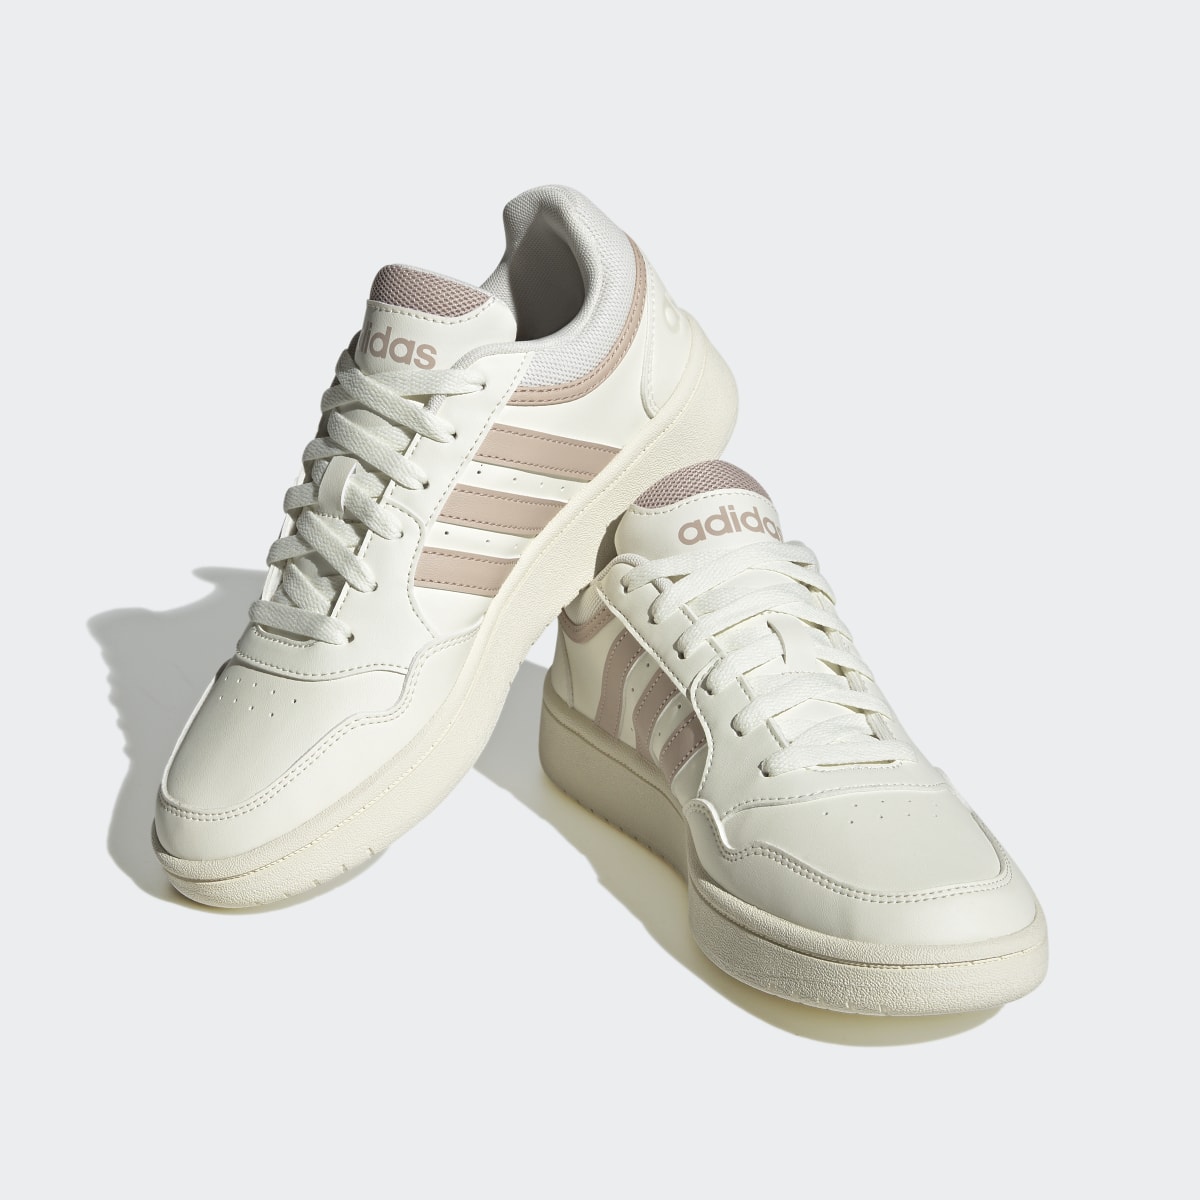 Adidas Hoops 3.0 Mid Lifestyle Basketball Low Schuh. 5